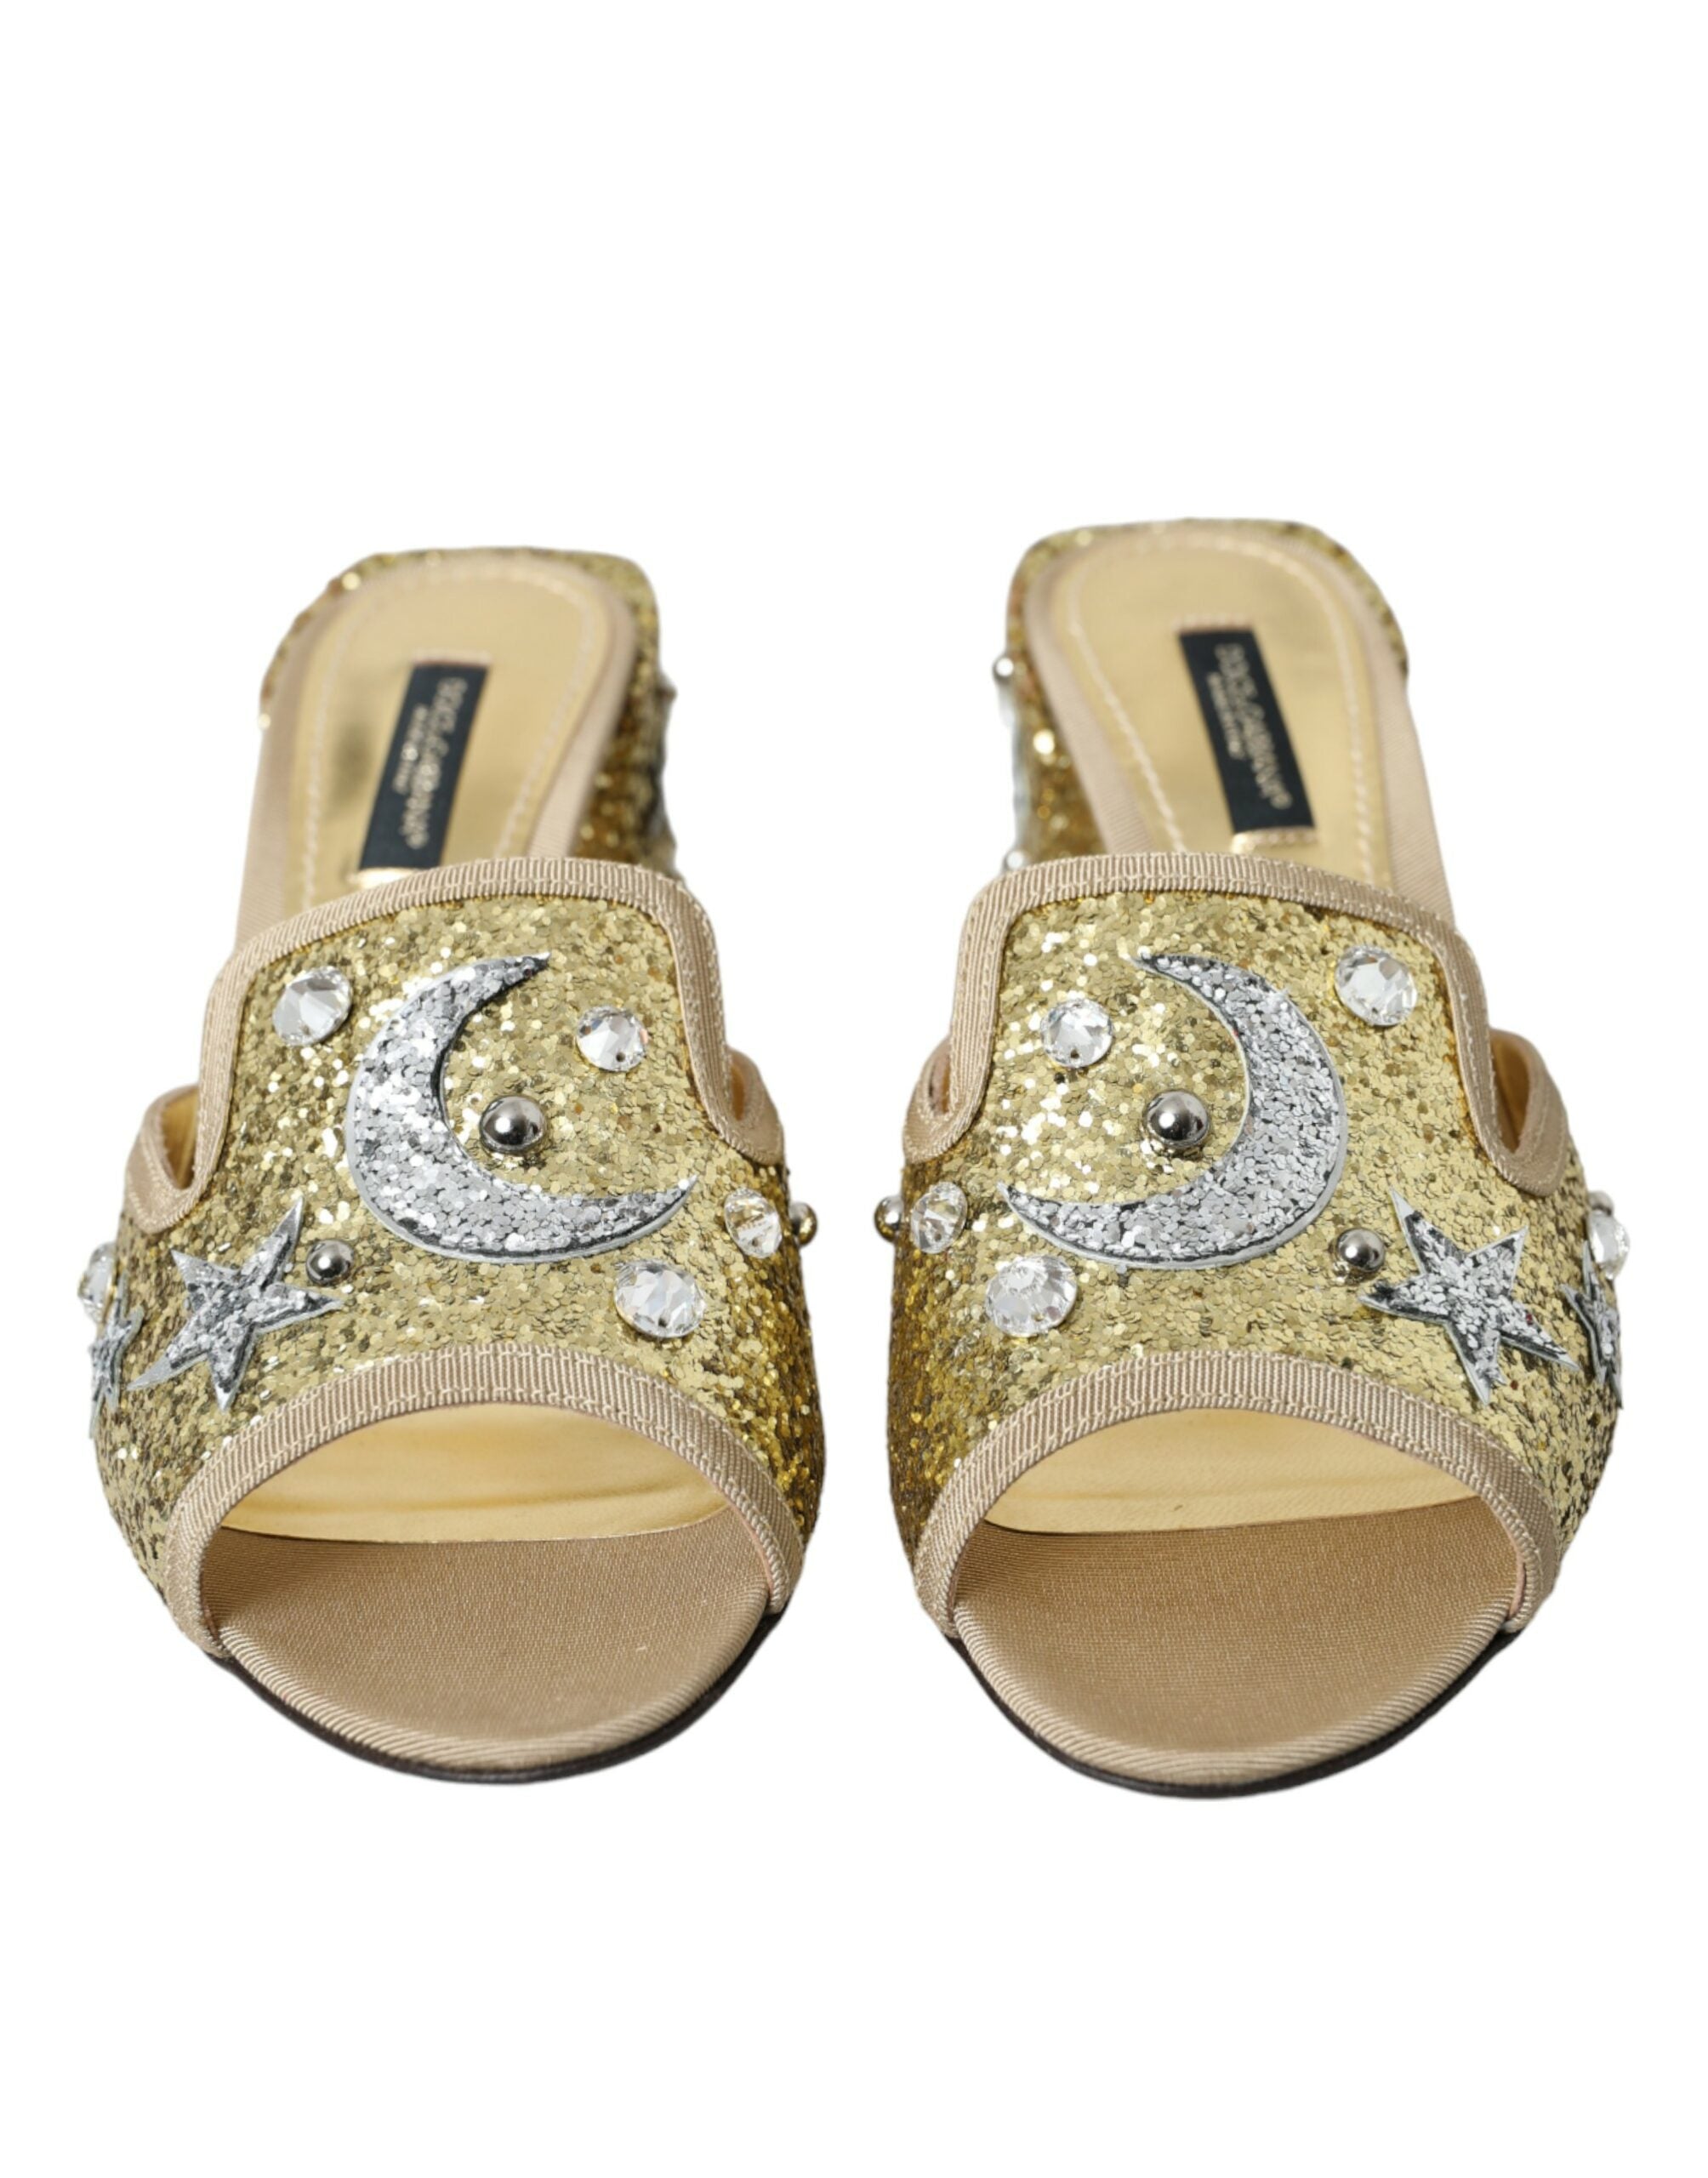 Gold Sequin Leather Heels Sandals Shoes